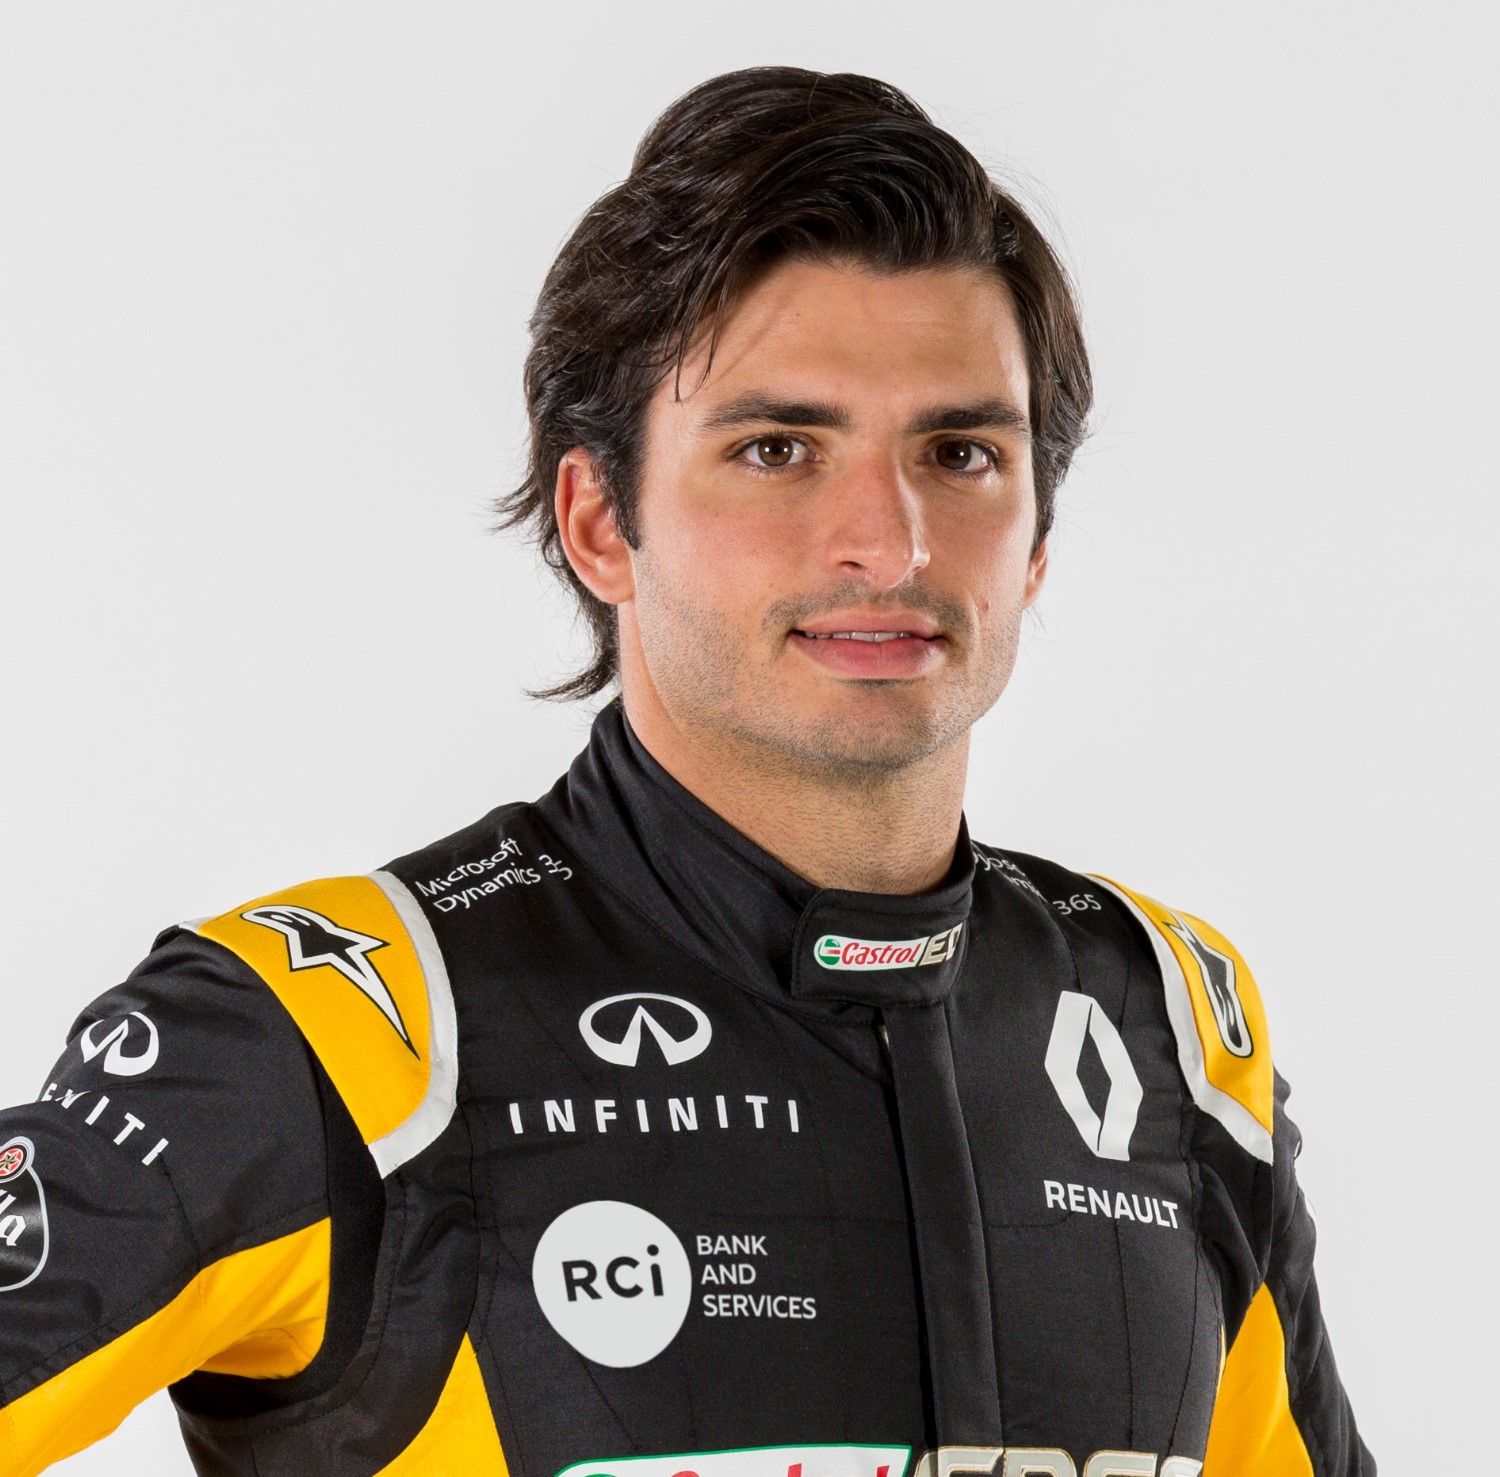 Carlos Sainz Jr. wants to win with Renault